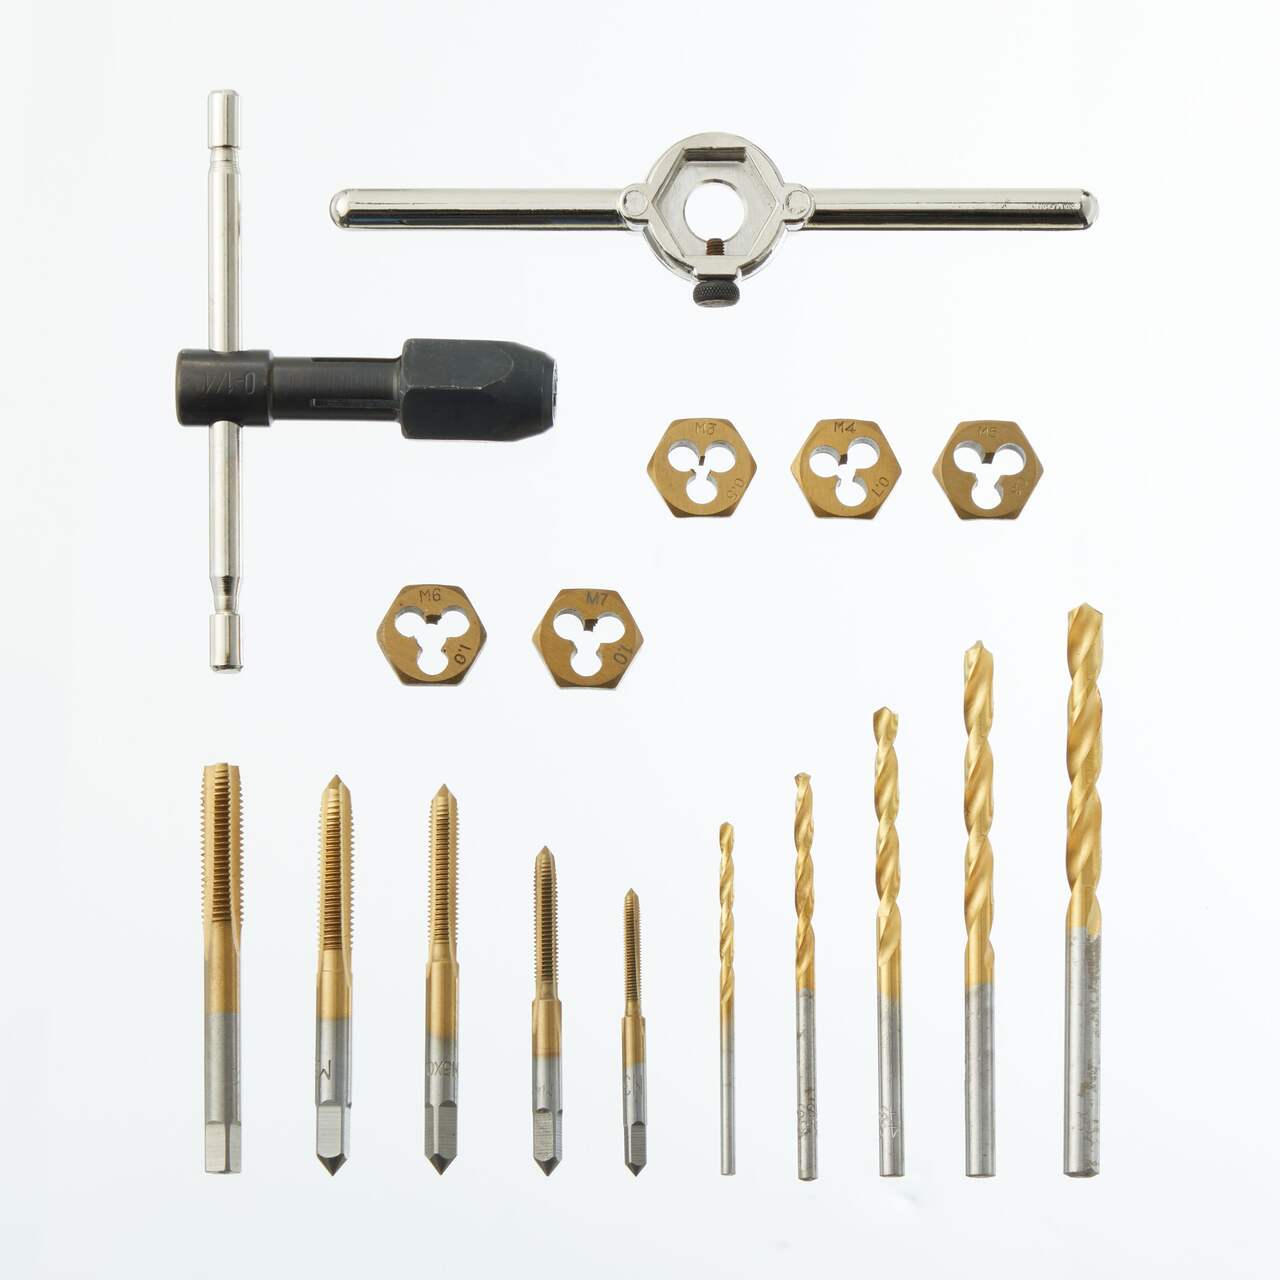 https://media-www.canadiantire.ca/product/fixing/tools/metal-working/0587209/maximum-17pc-tap-die-set-metric-a0e6c032-19f5-4b7d-aee8-aa0fa47bc872-jpgrendition.jpg?imdensity=1&imwidth=640&impolicy=mZoom